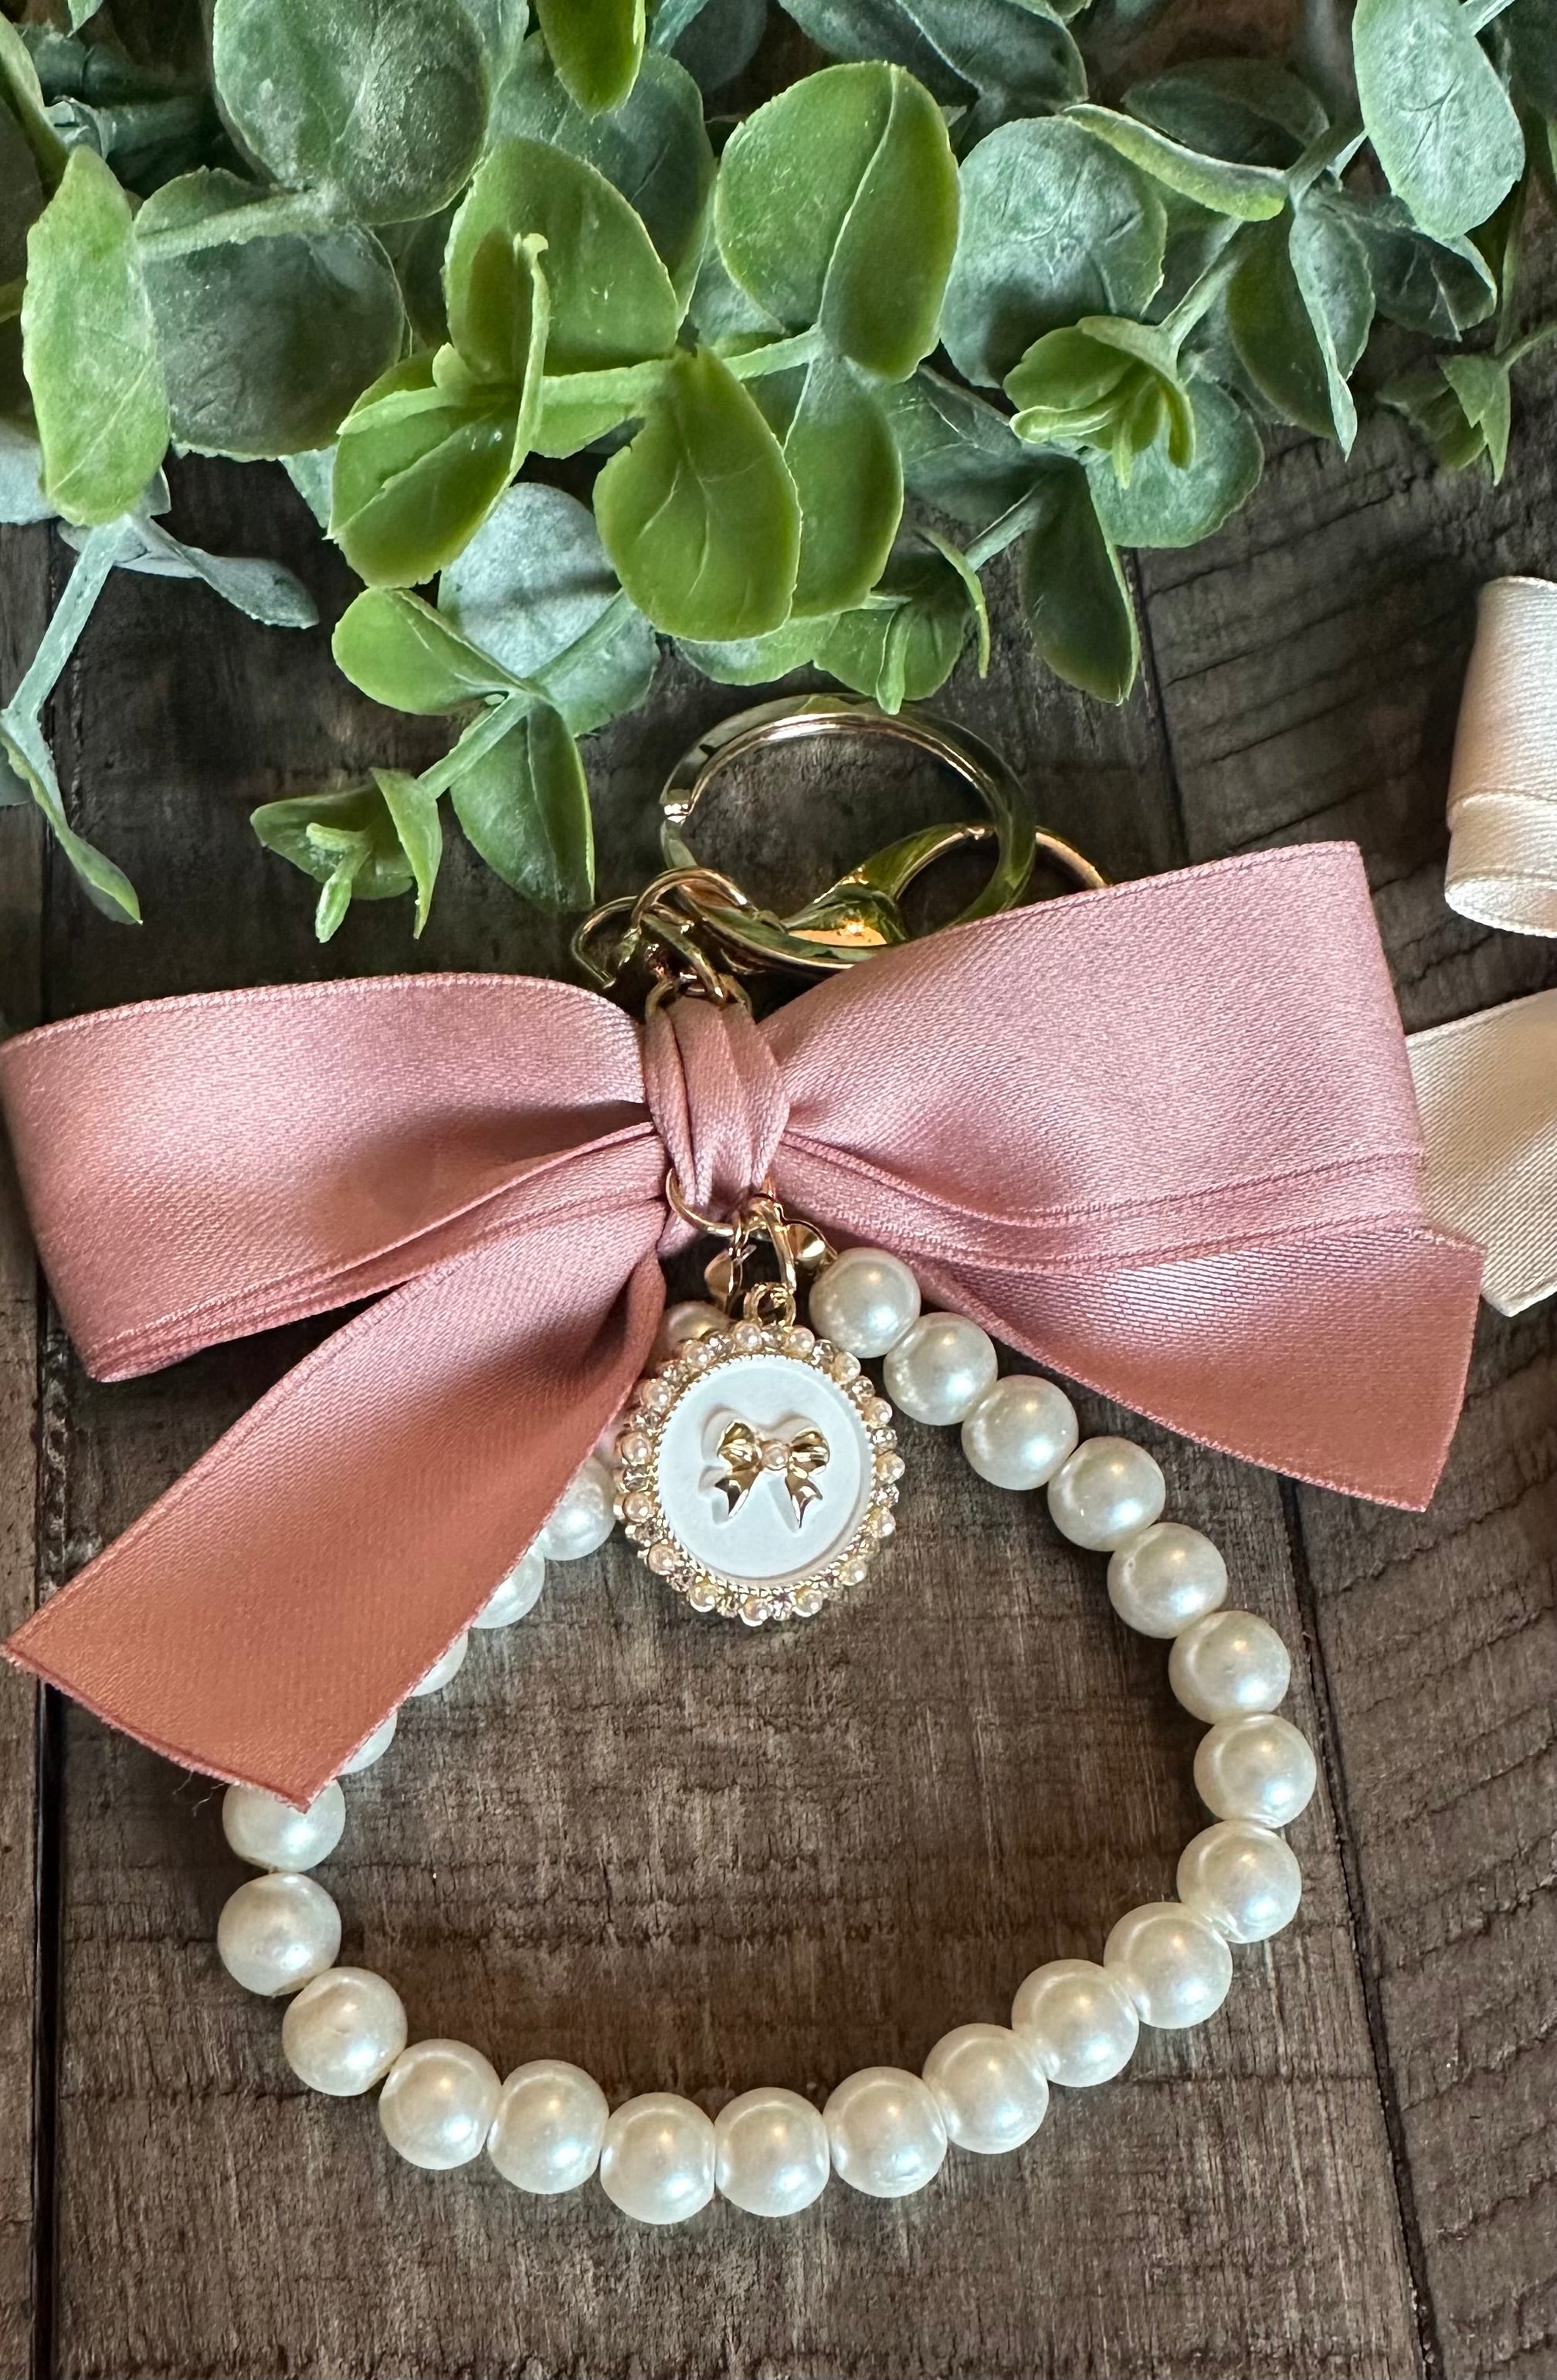 Bow and pearls keychain